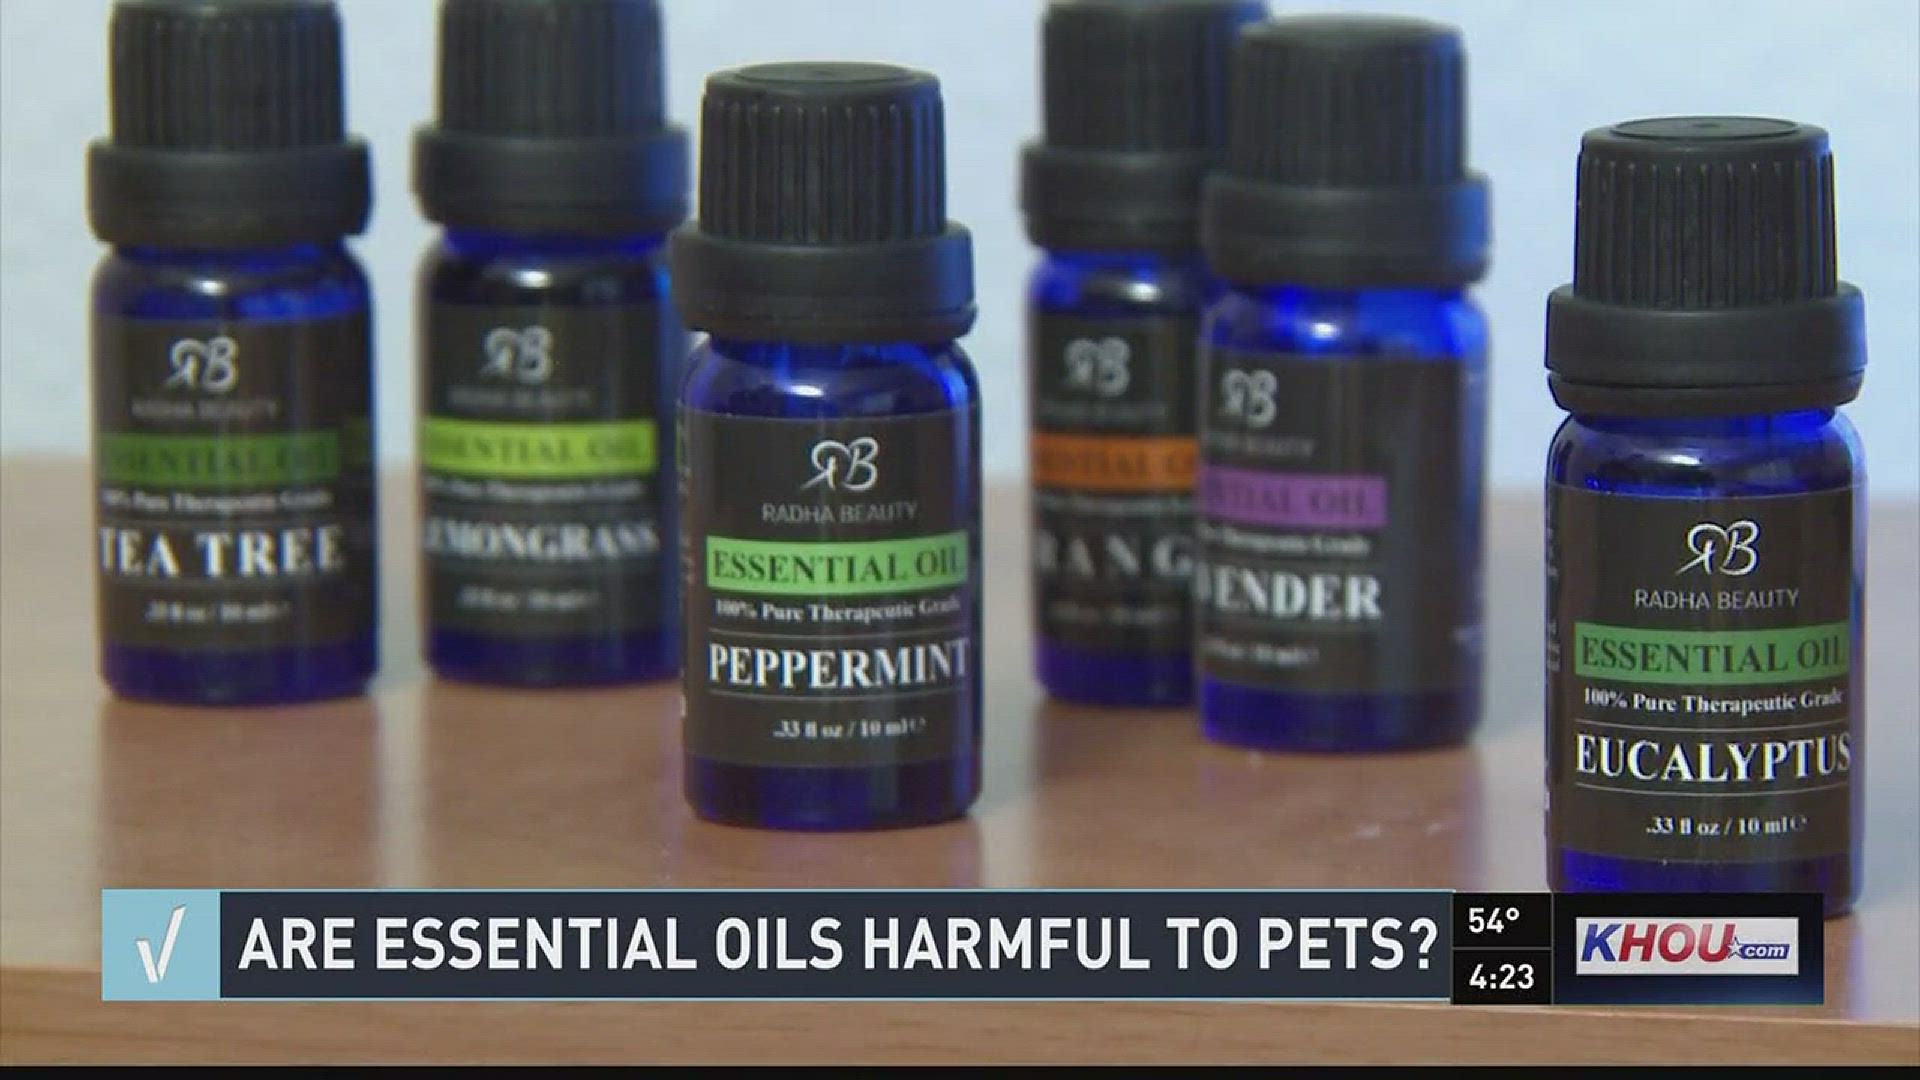 Our Verify team is looking into a claim that essential oils, which are growing in popularity, can be harmful to pets.